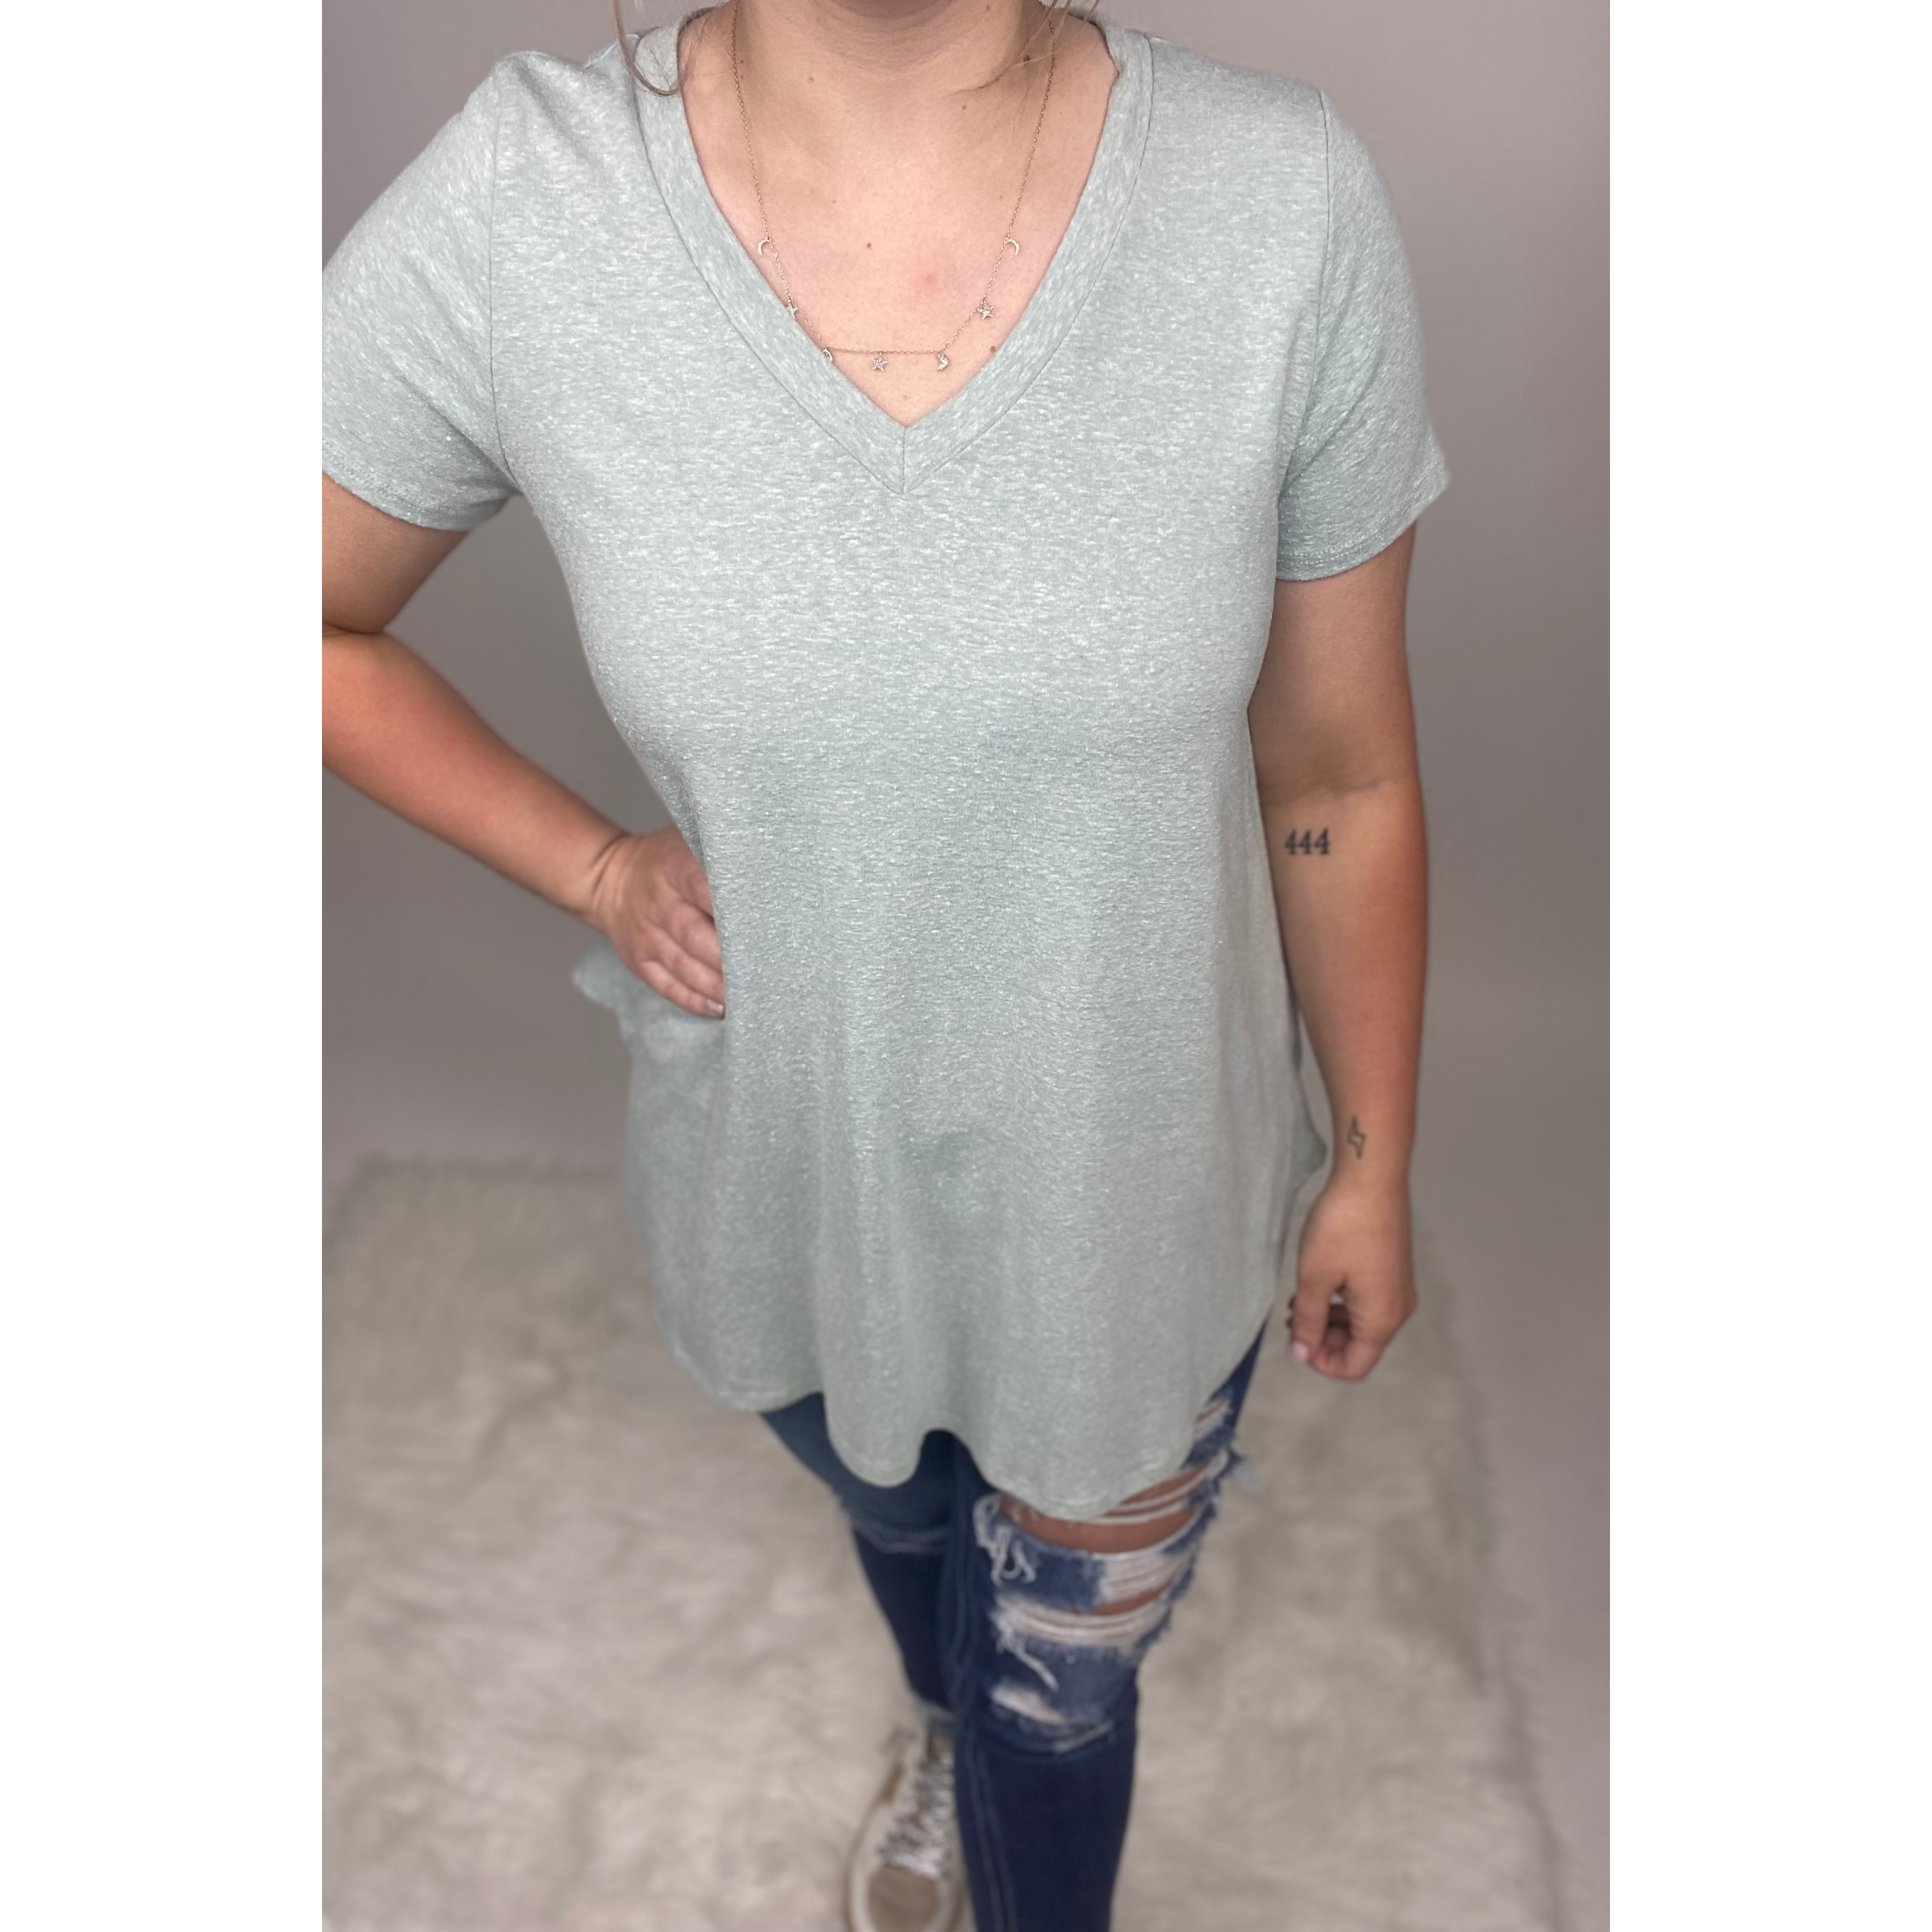 Curvy Anything But Basic Tee *Final Sale*